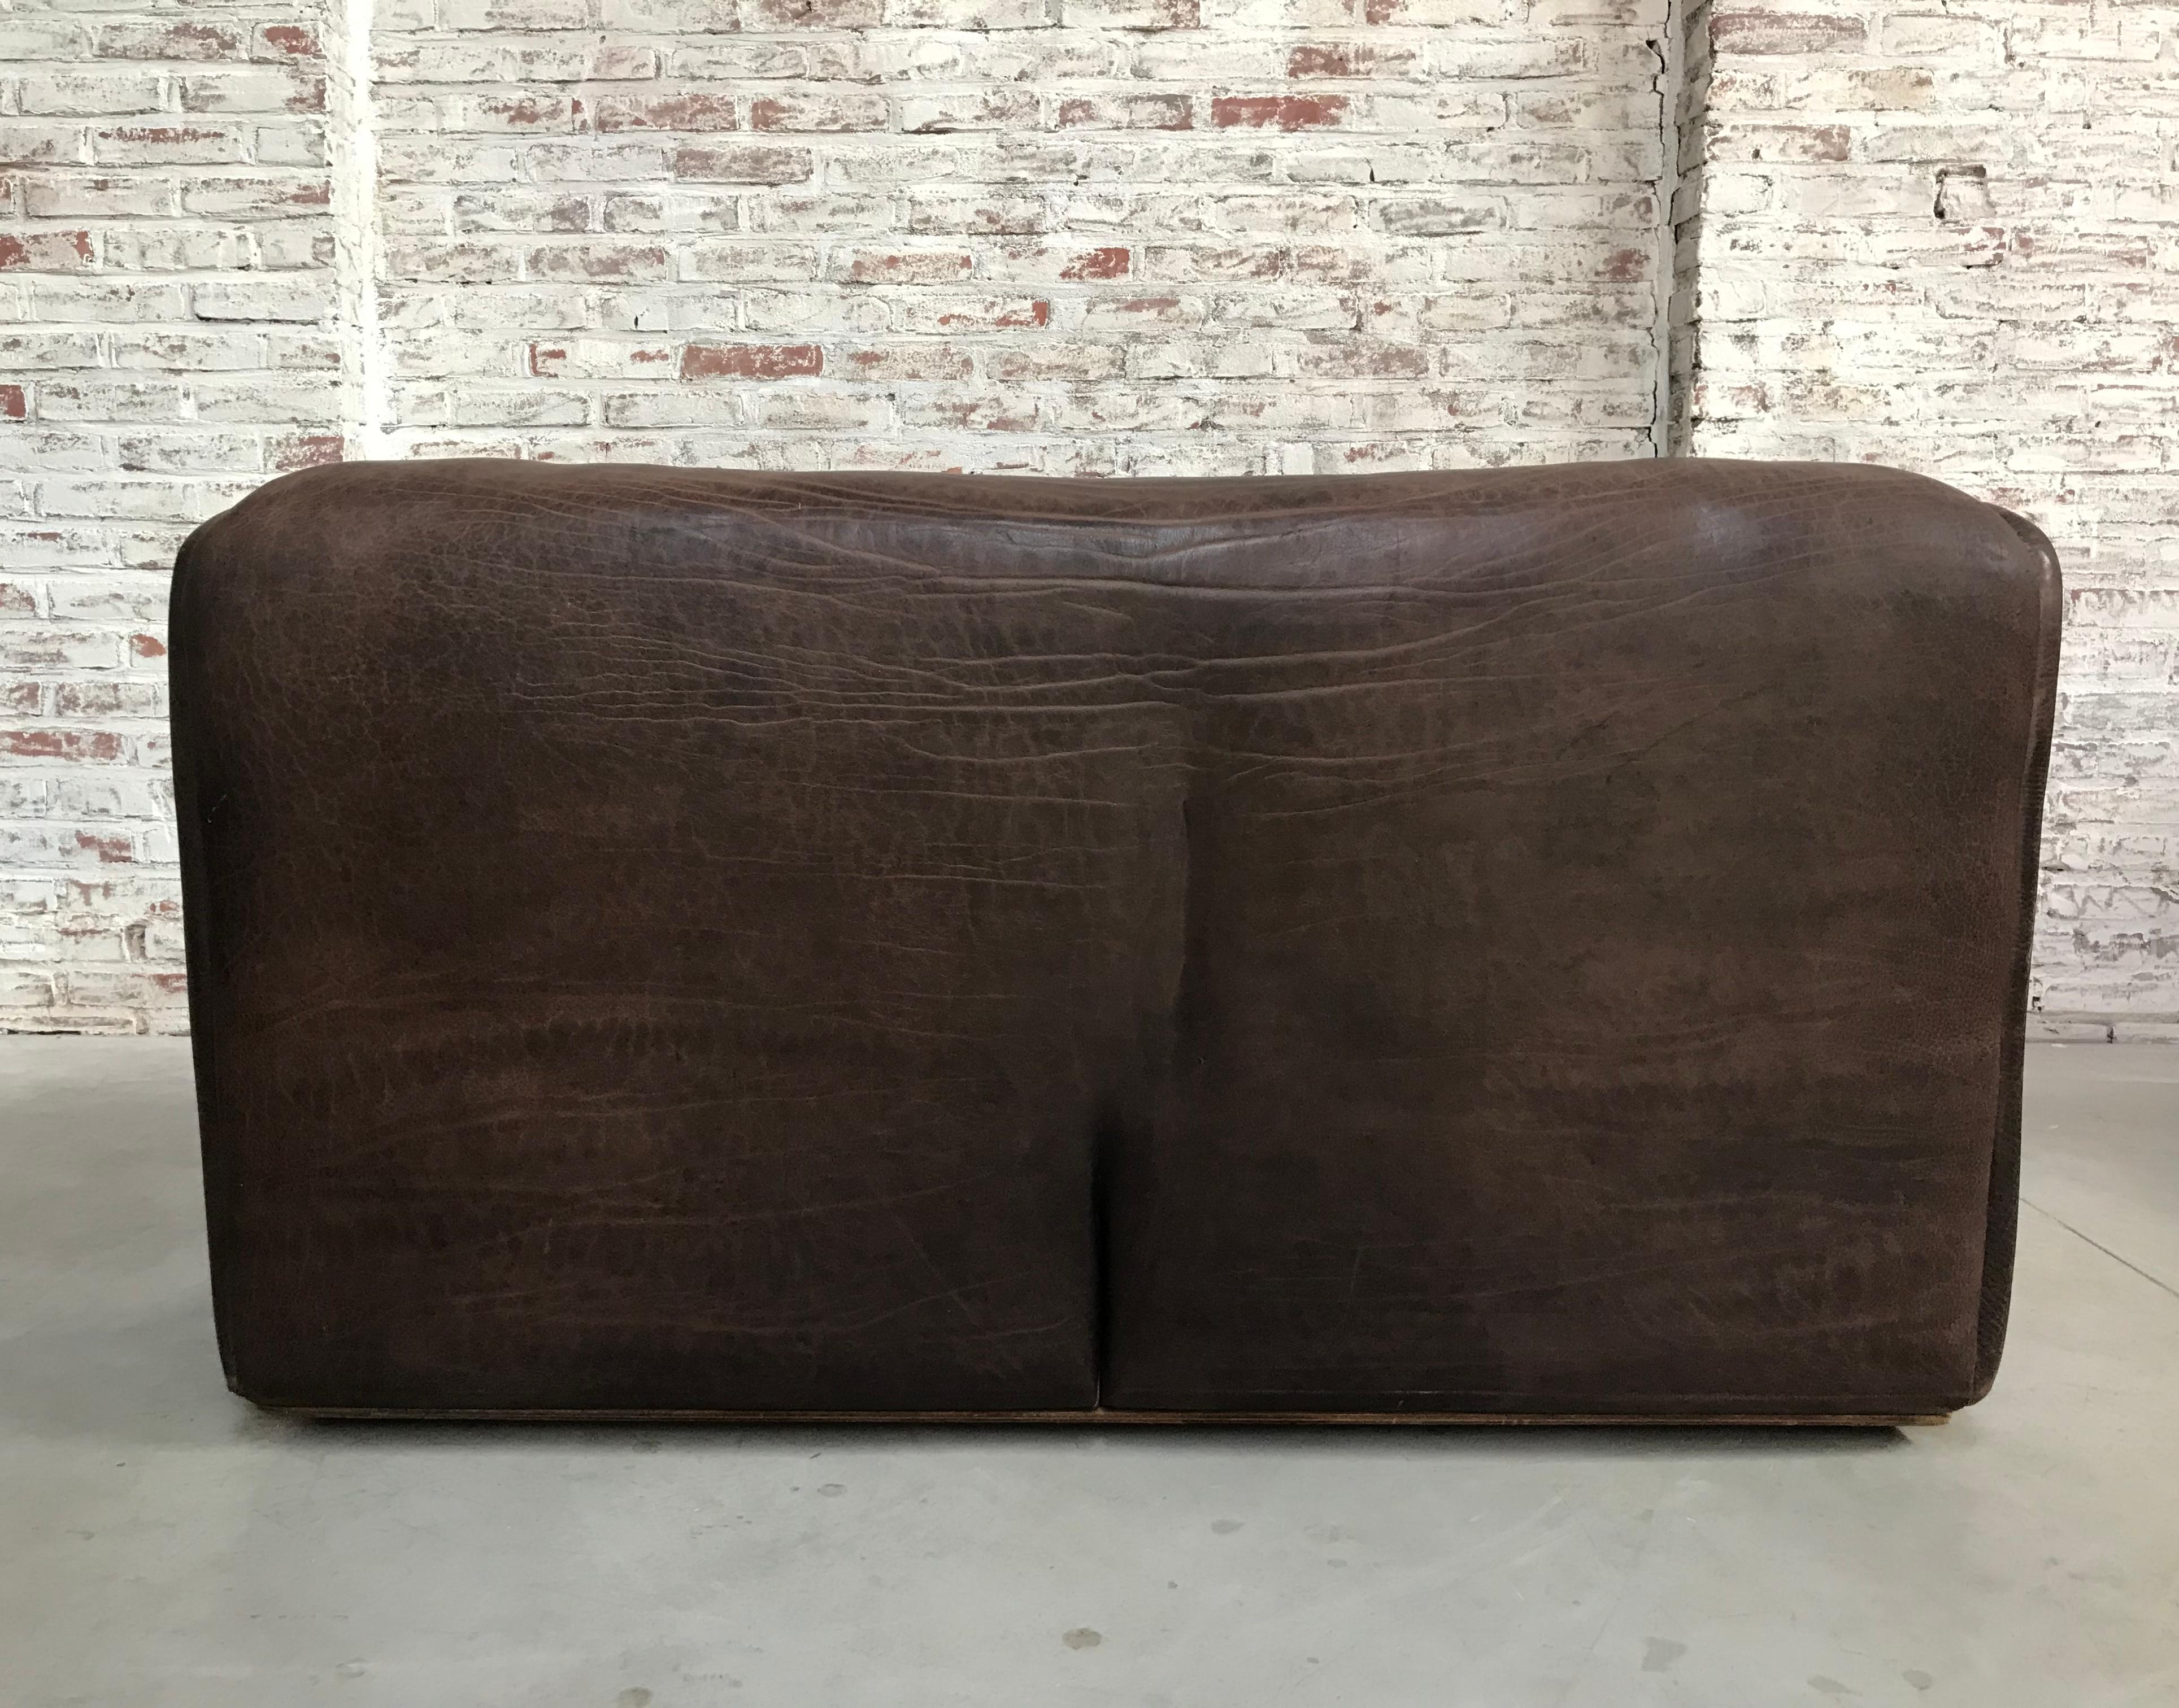 Late 20th Century Midcentury Swiss De Sede Ds-47 Two-Seat in Chocolat Neck Leather, 1970s For Sale